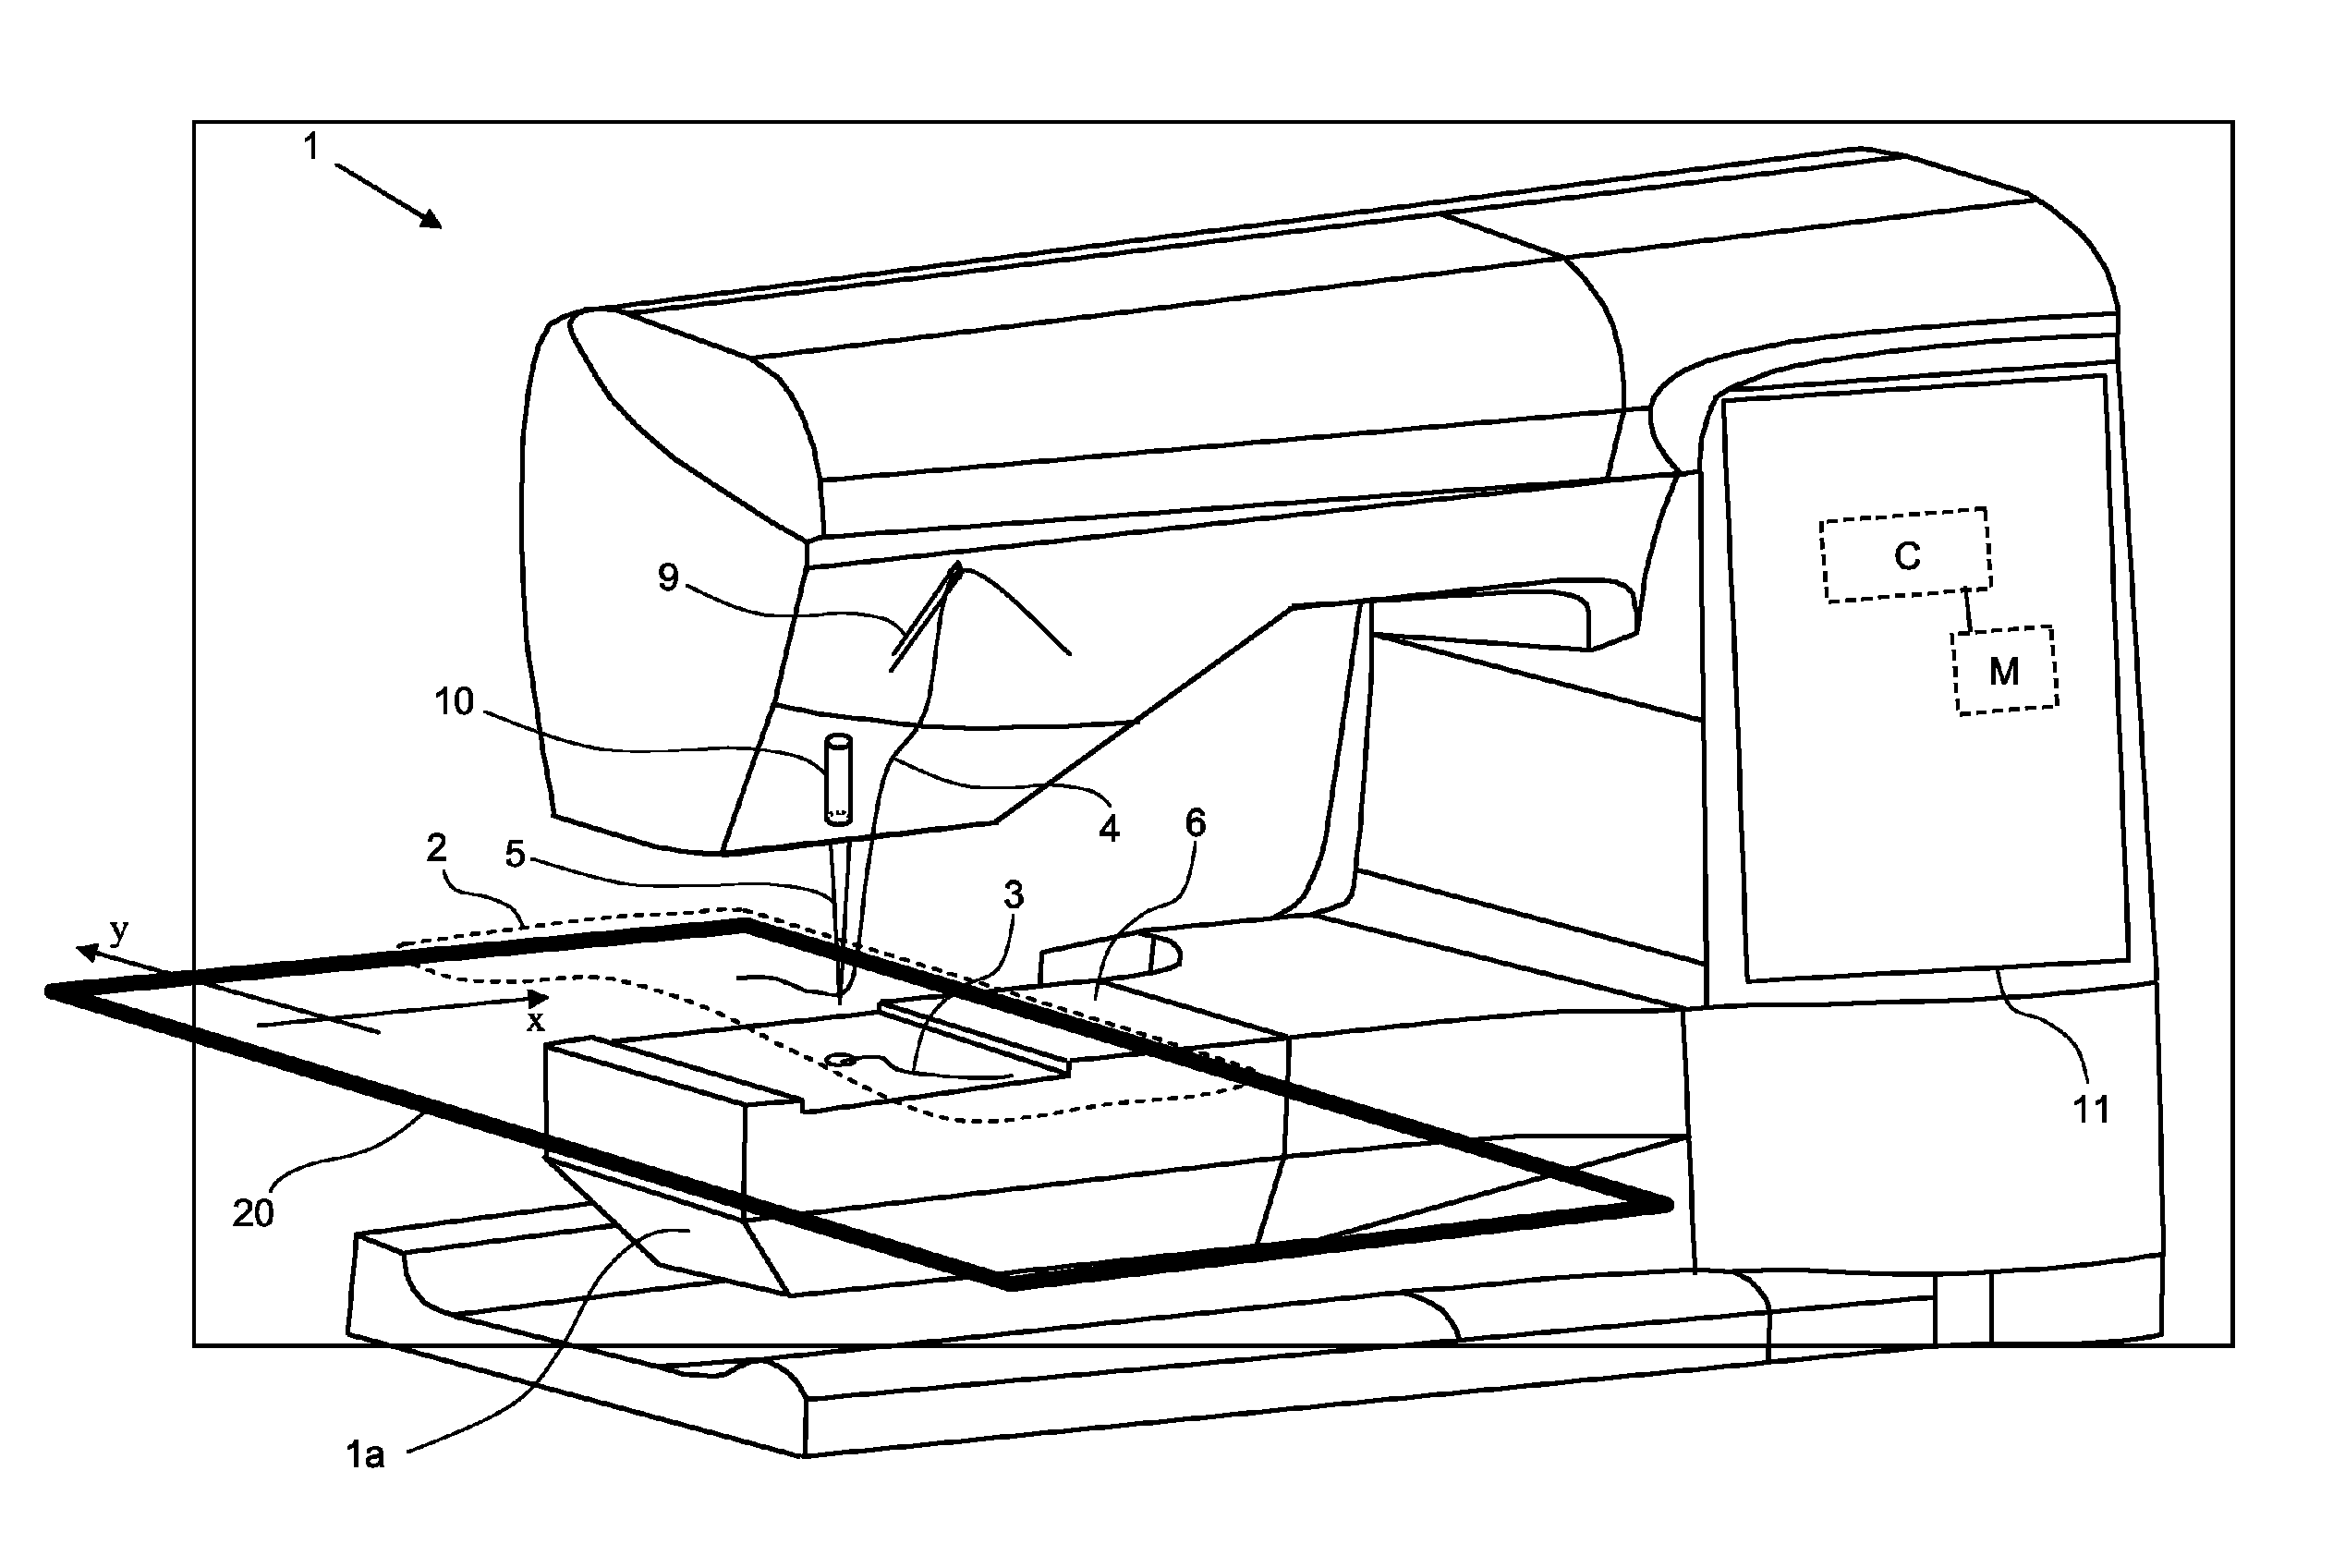 Sewing machine having a camera for forming images of a sewing area